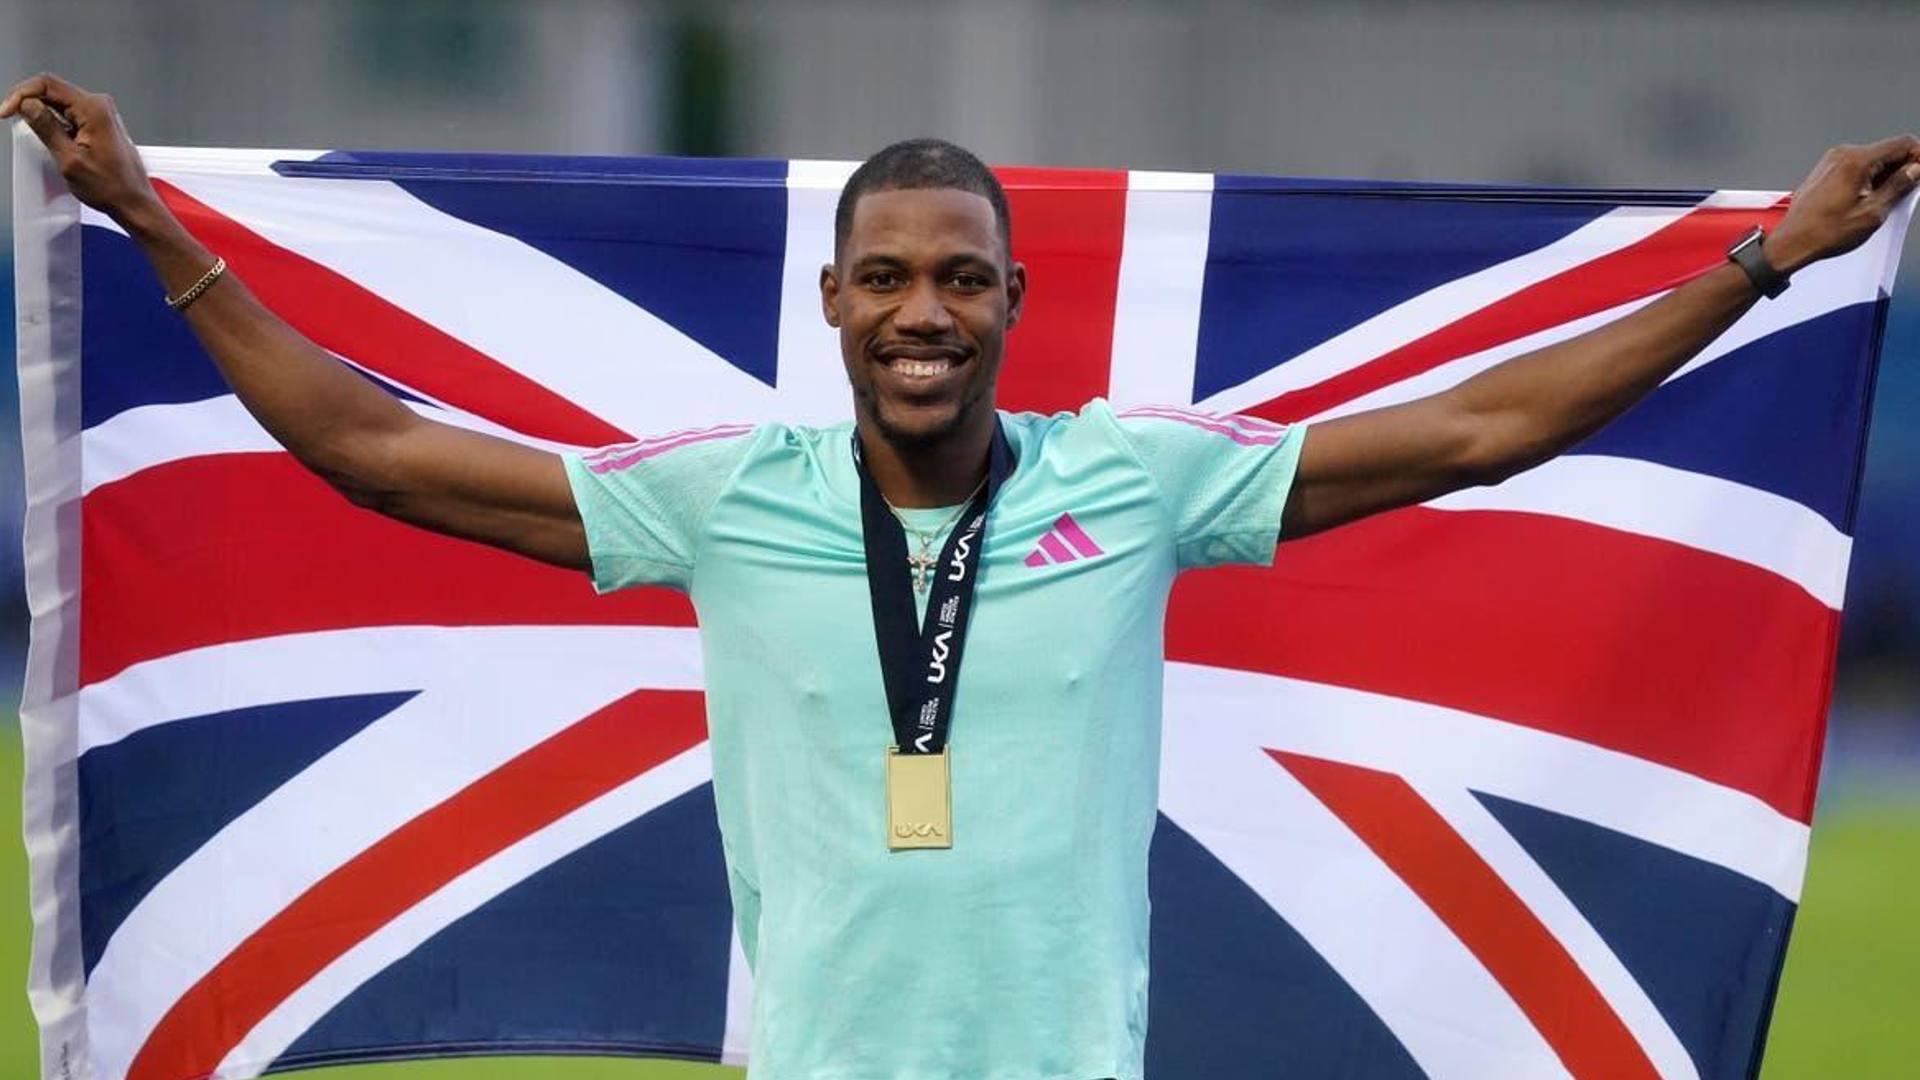 Zharnel Hughes holding the Great Britain flag (Image Credits - Twitter)